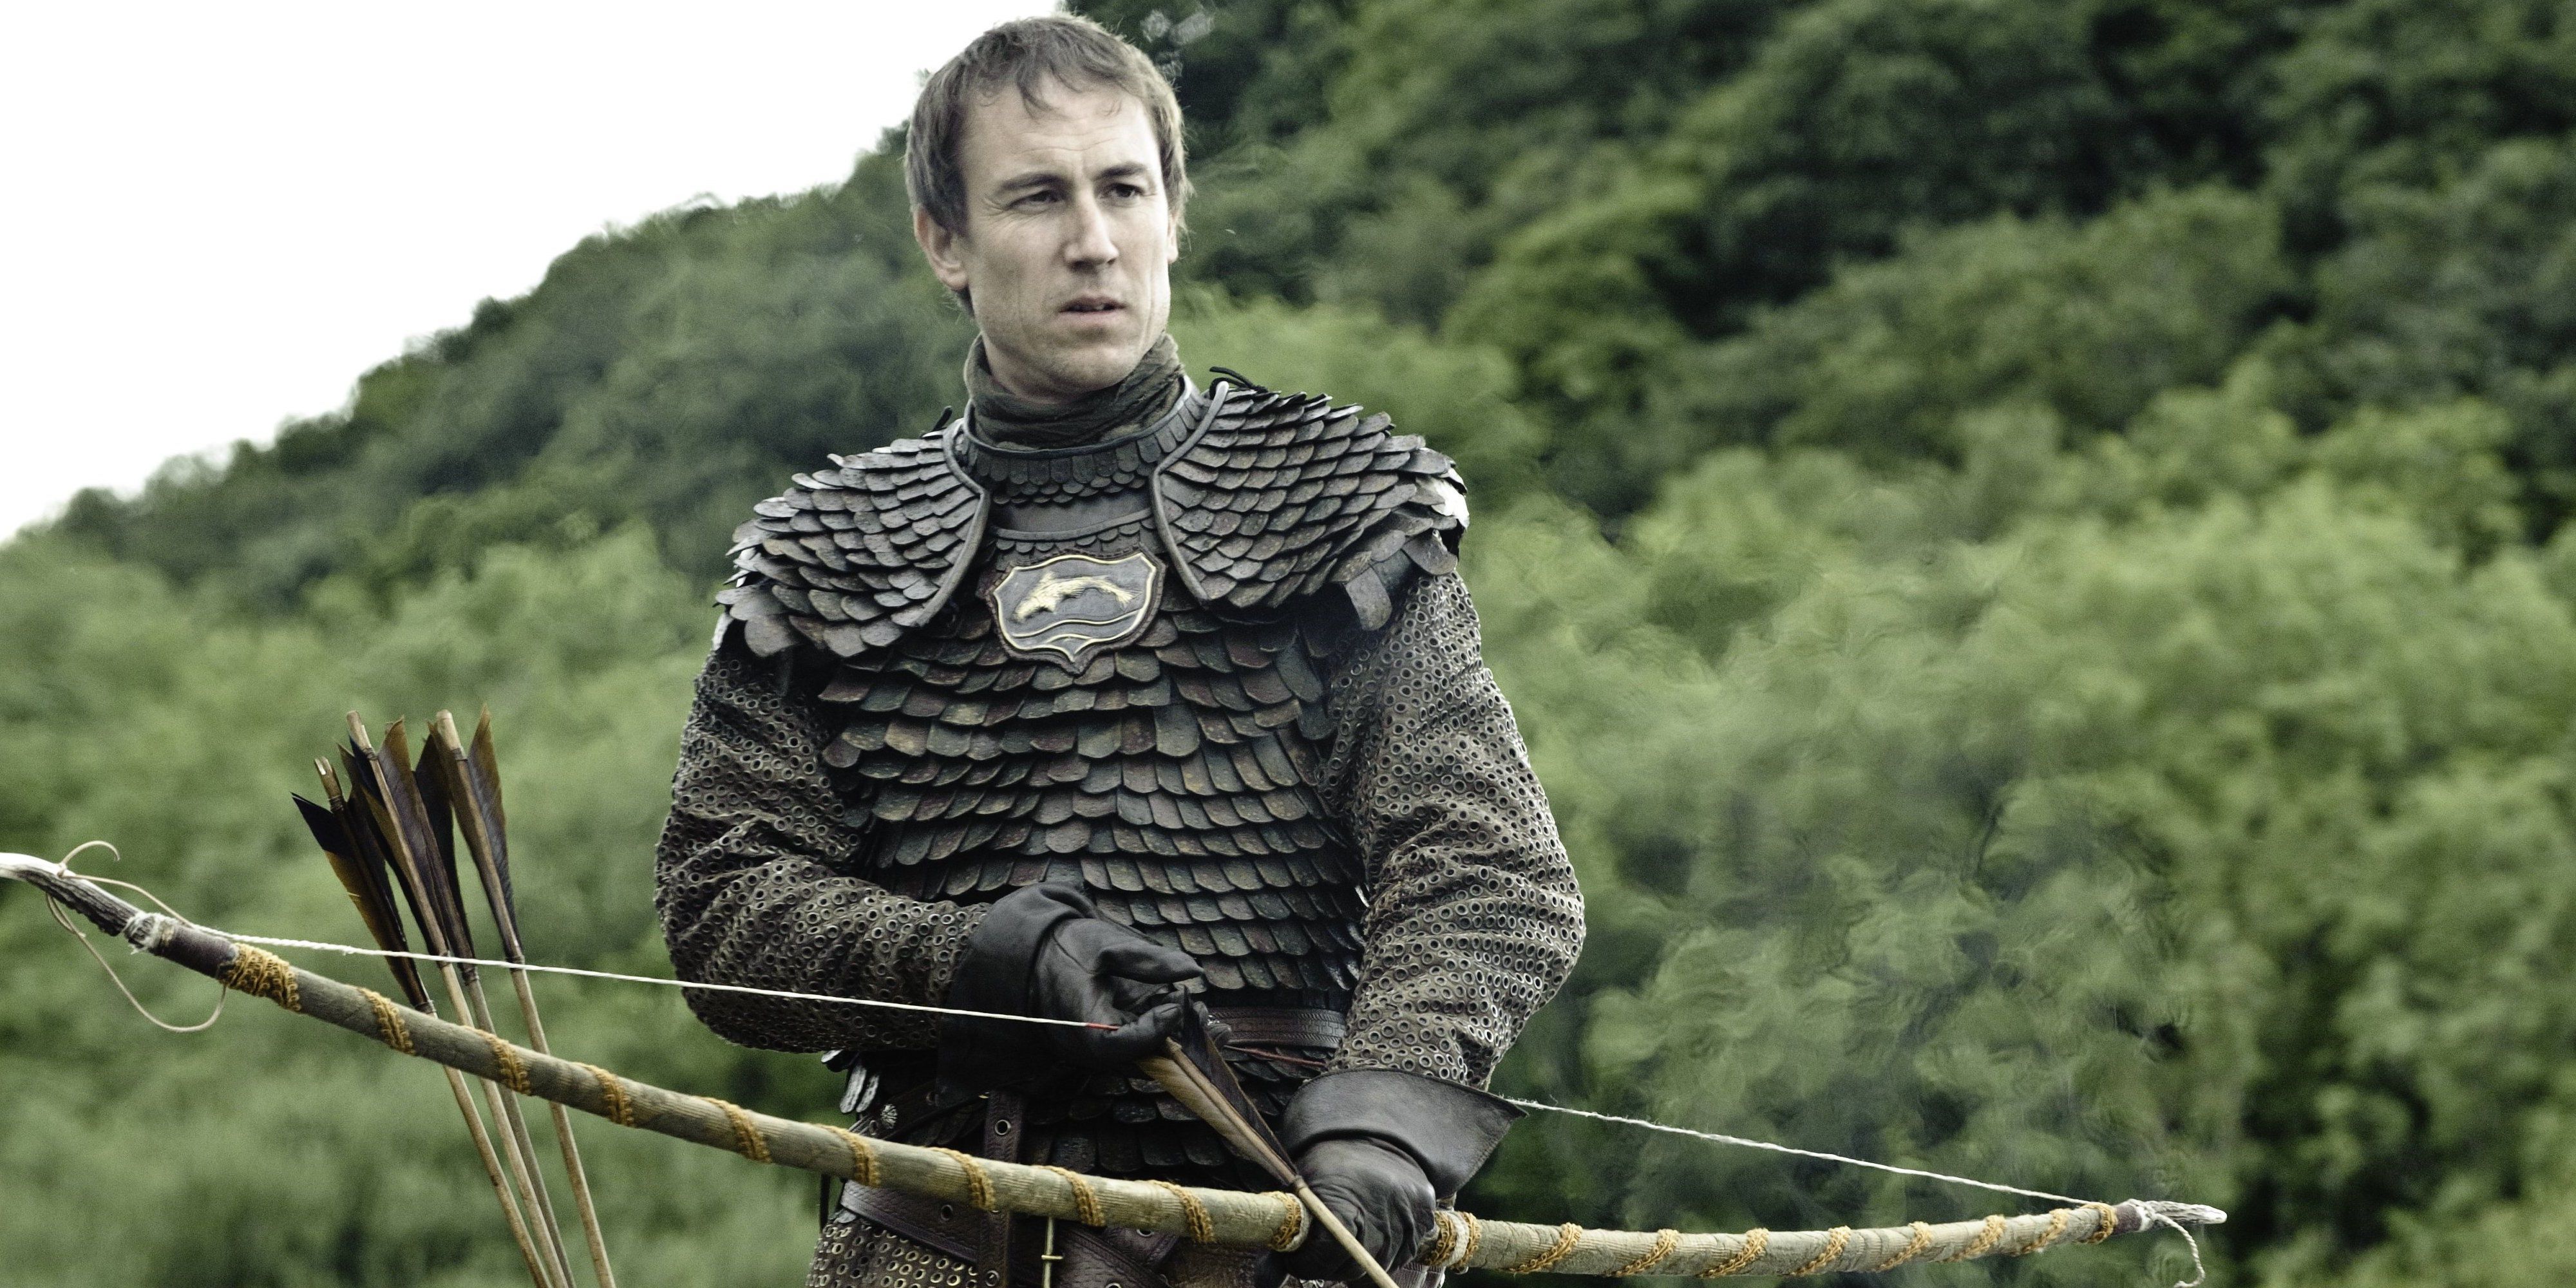 Edmure Tully of Riverrun